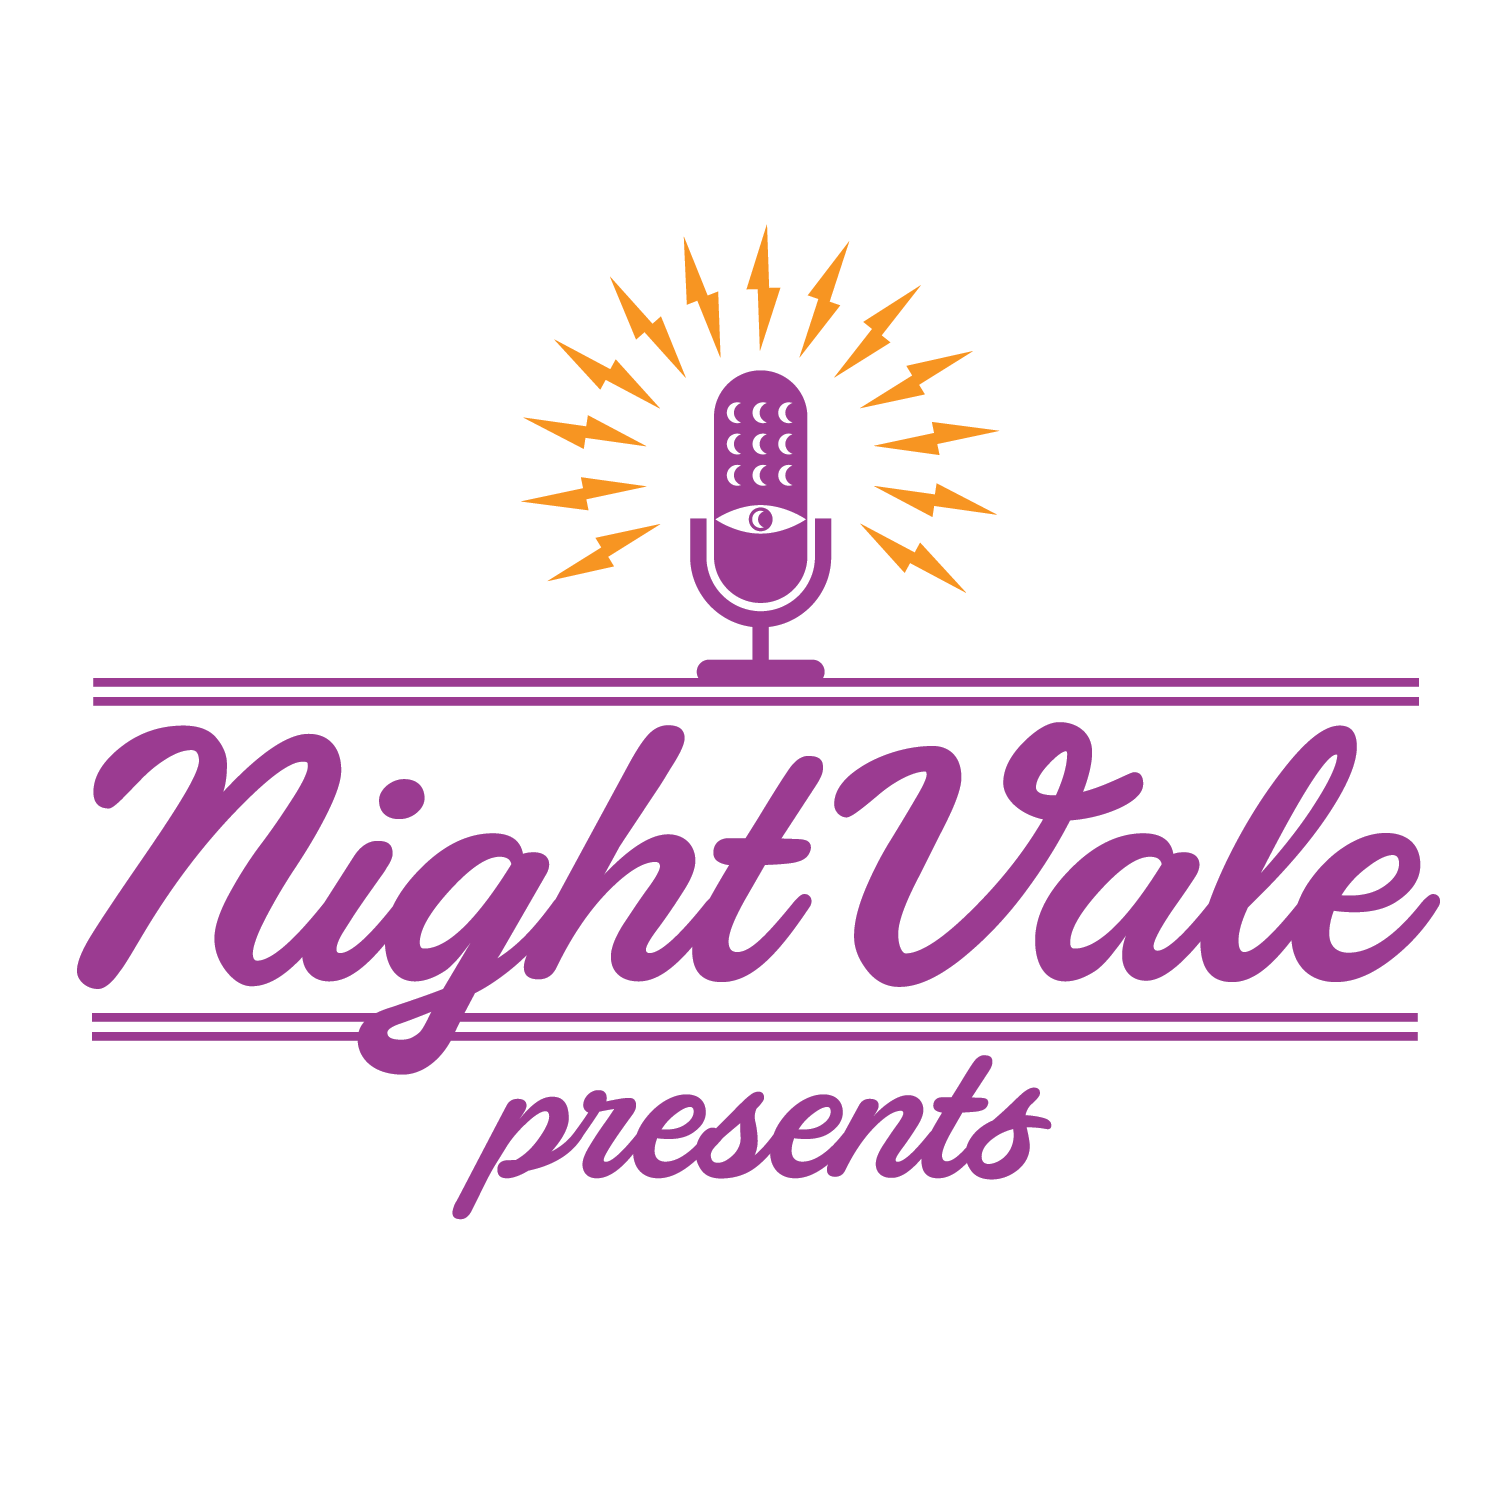 "Welcome to Night Vale" Podcast